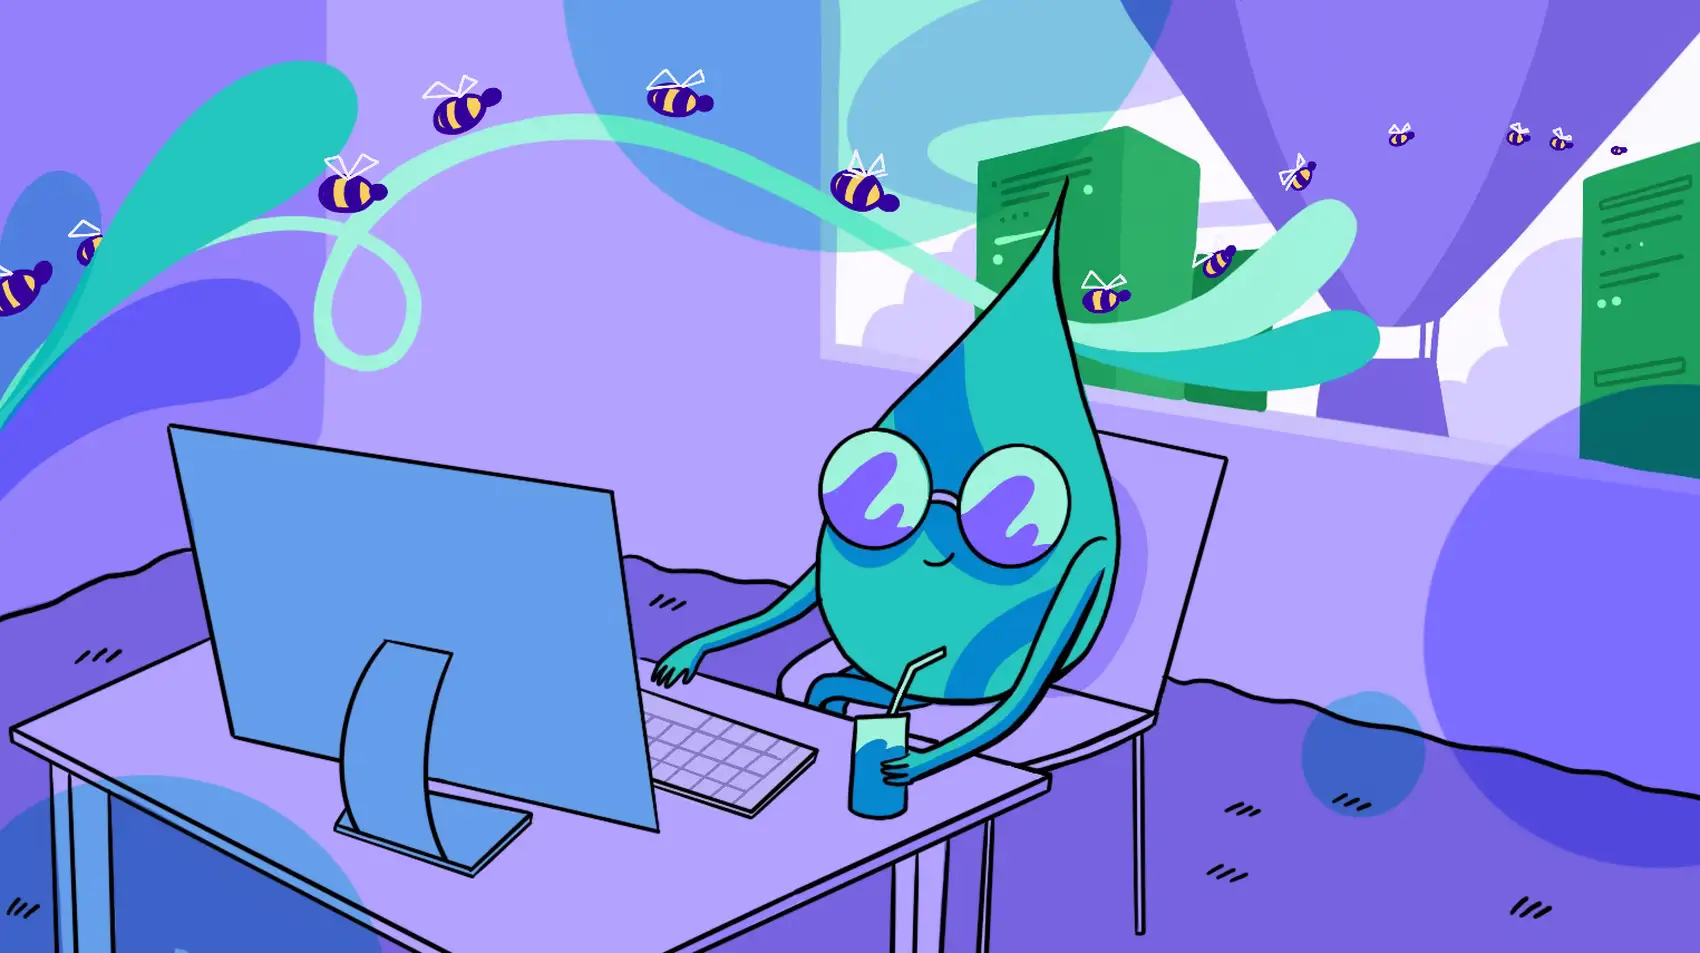 A cool Elixir drop characters wearing sunglasses, sitting at home on a computer. A swoosh goes from the computer to a Fly.io balloon outside. There are bumblebees following the swoosh to the Fly balloon.